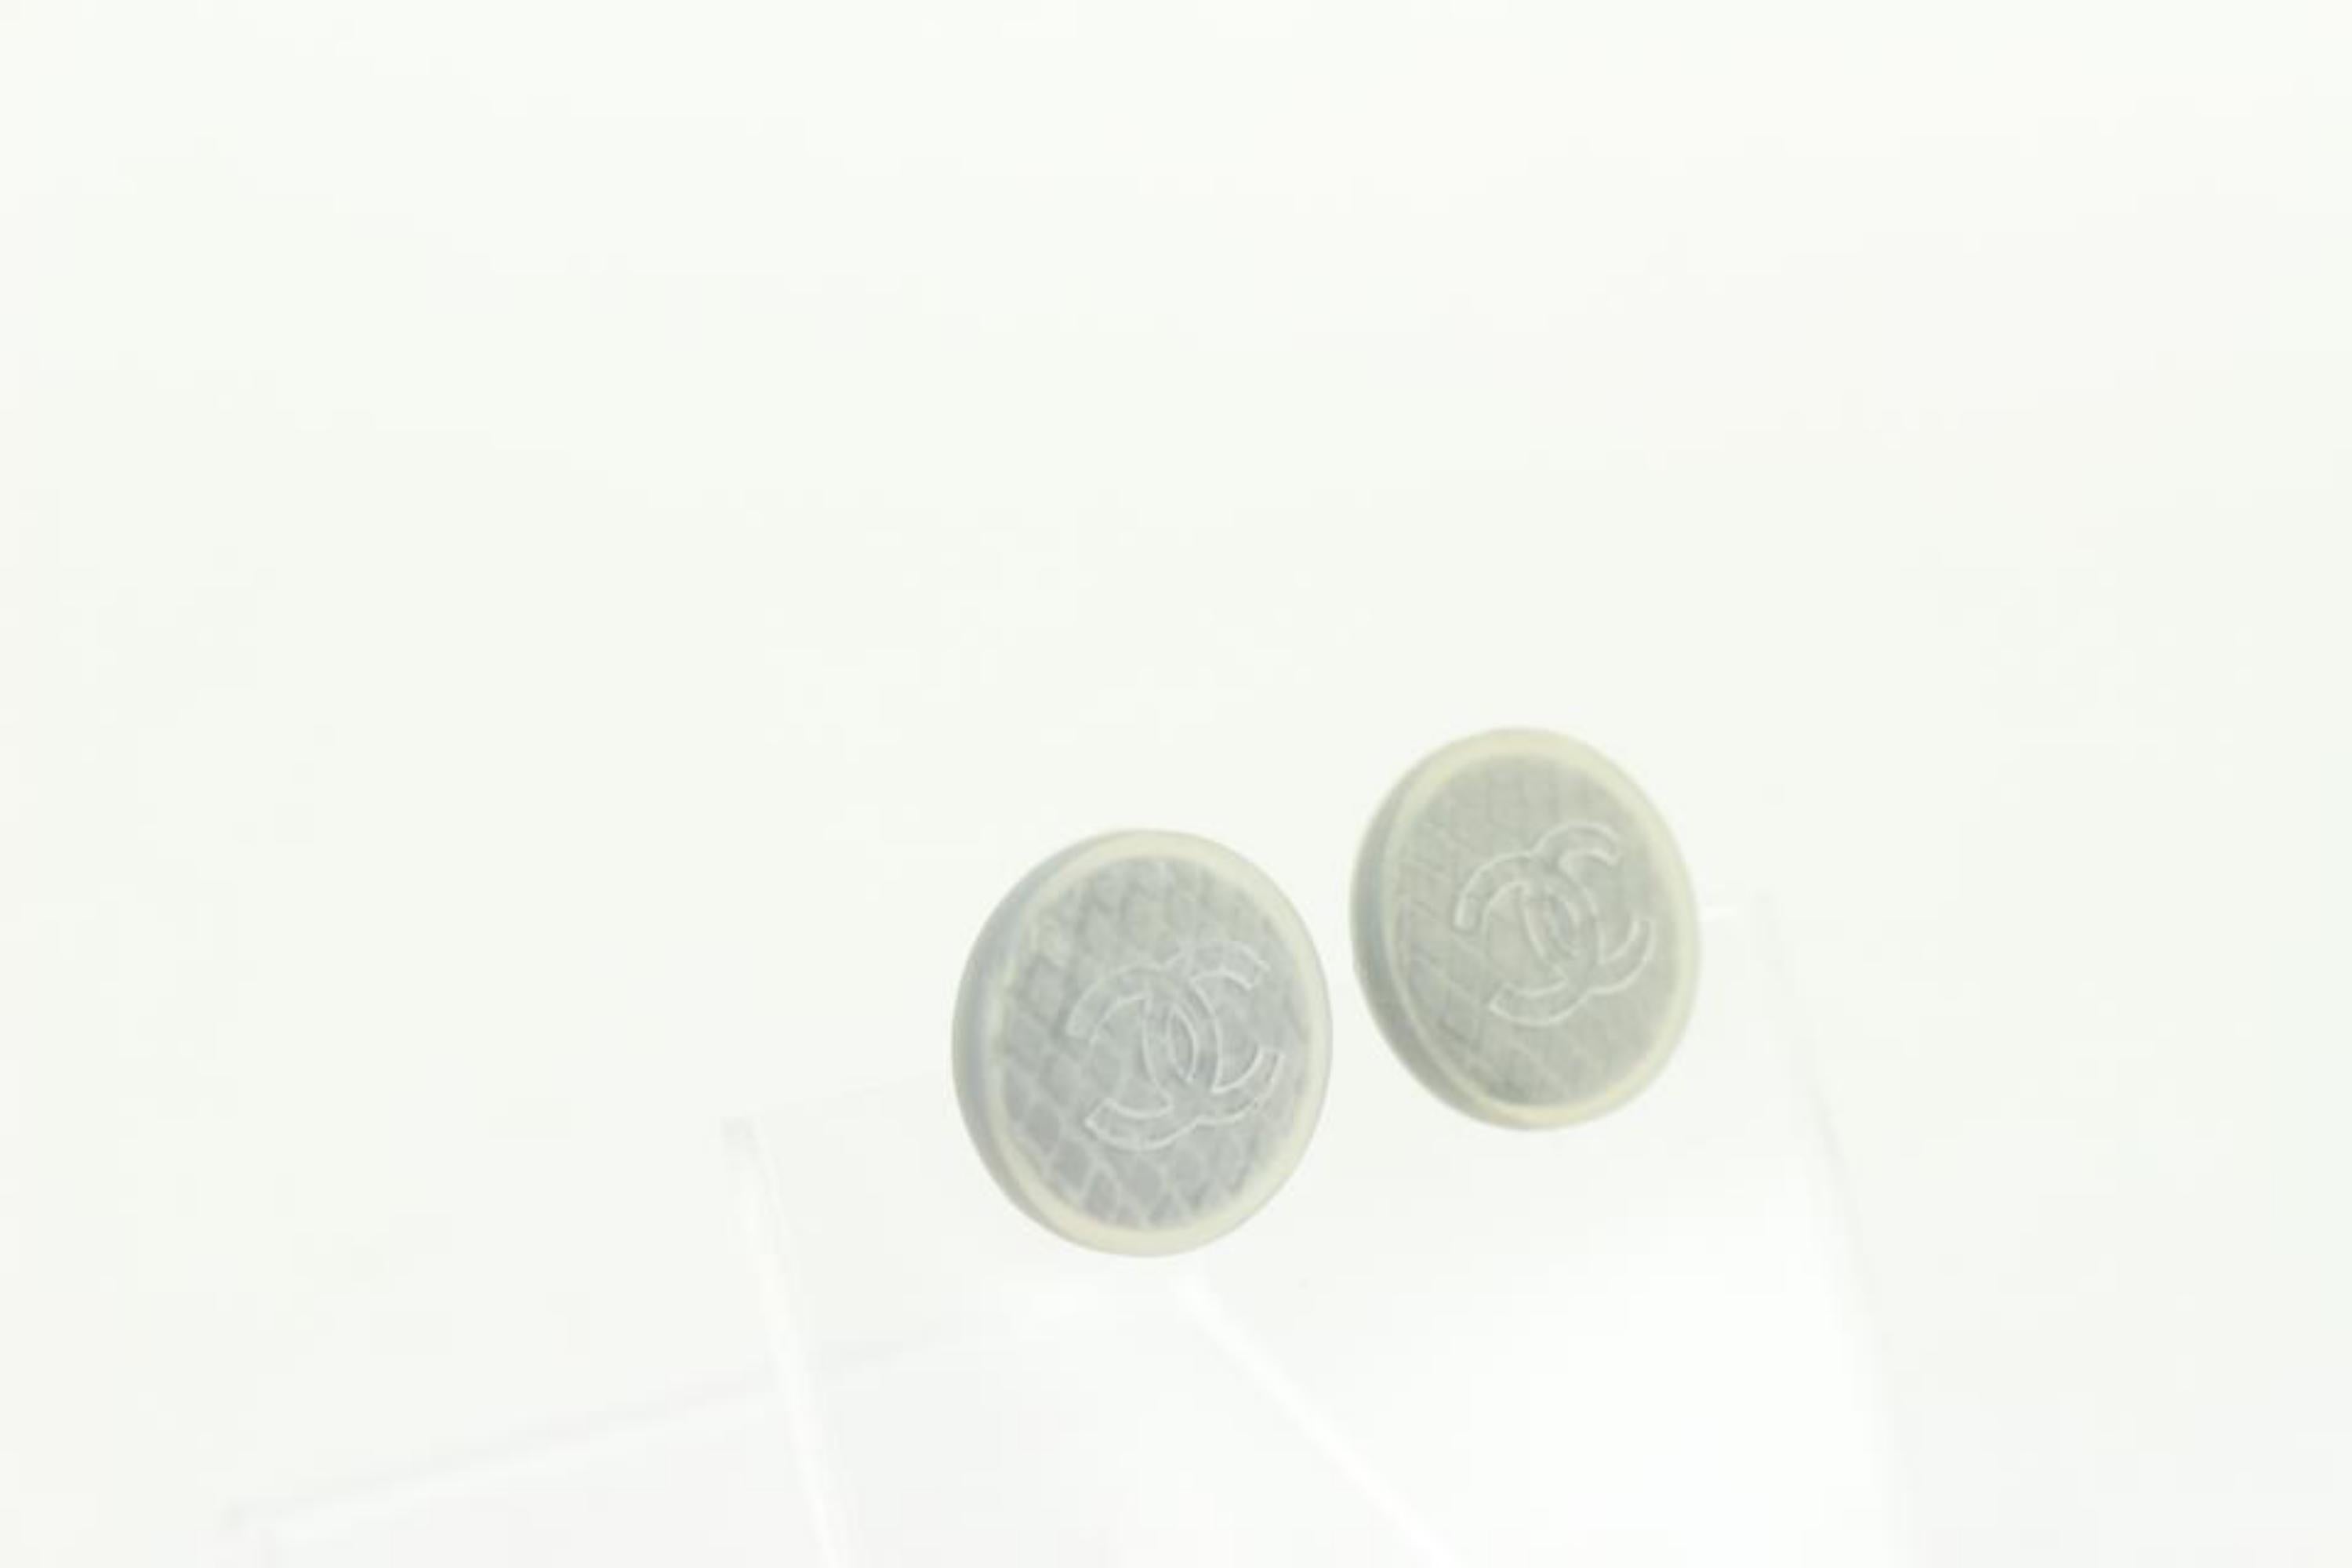 Chanel 99S Quilted Jelly CC Pierce Earrings 108c23 In Excellent Condition For Sale In Dix hills, NY